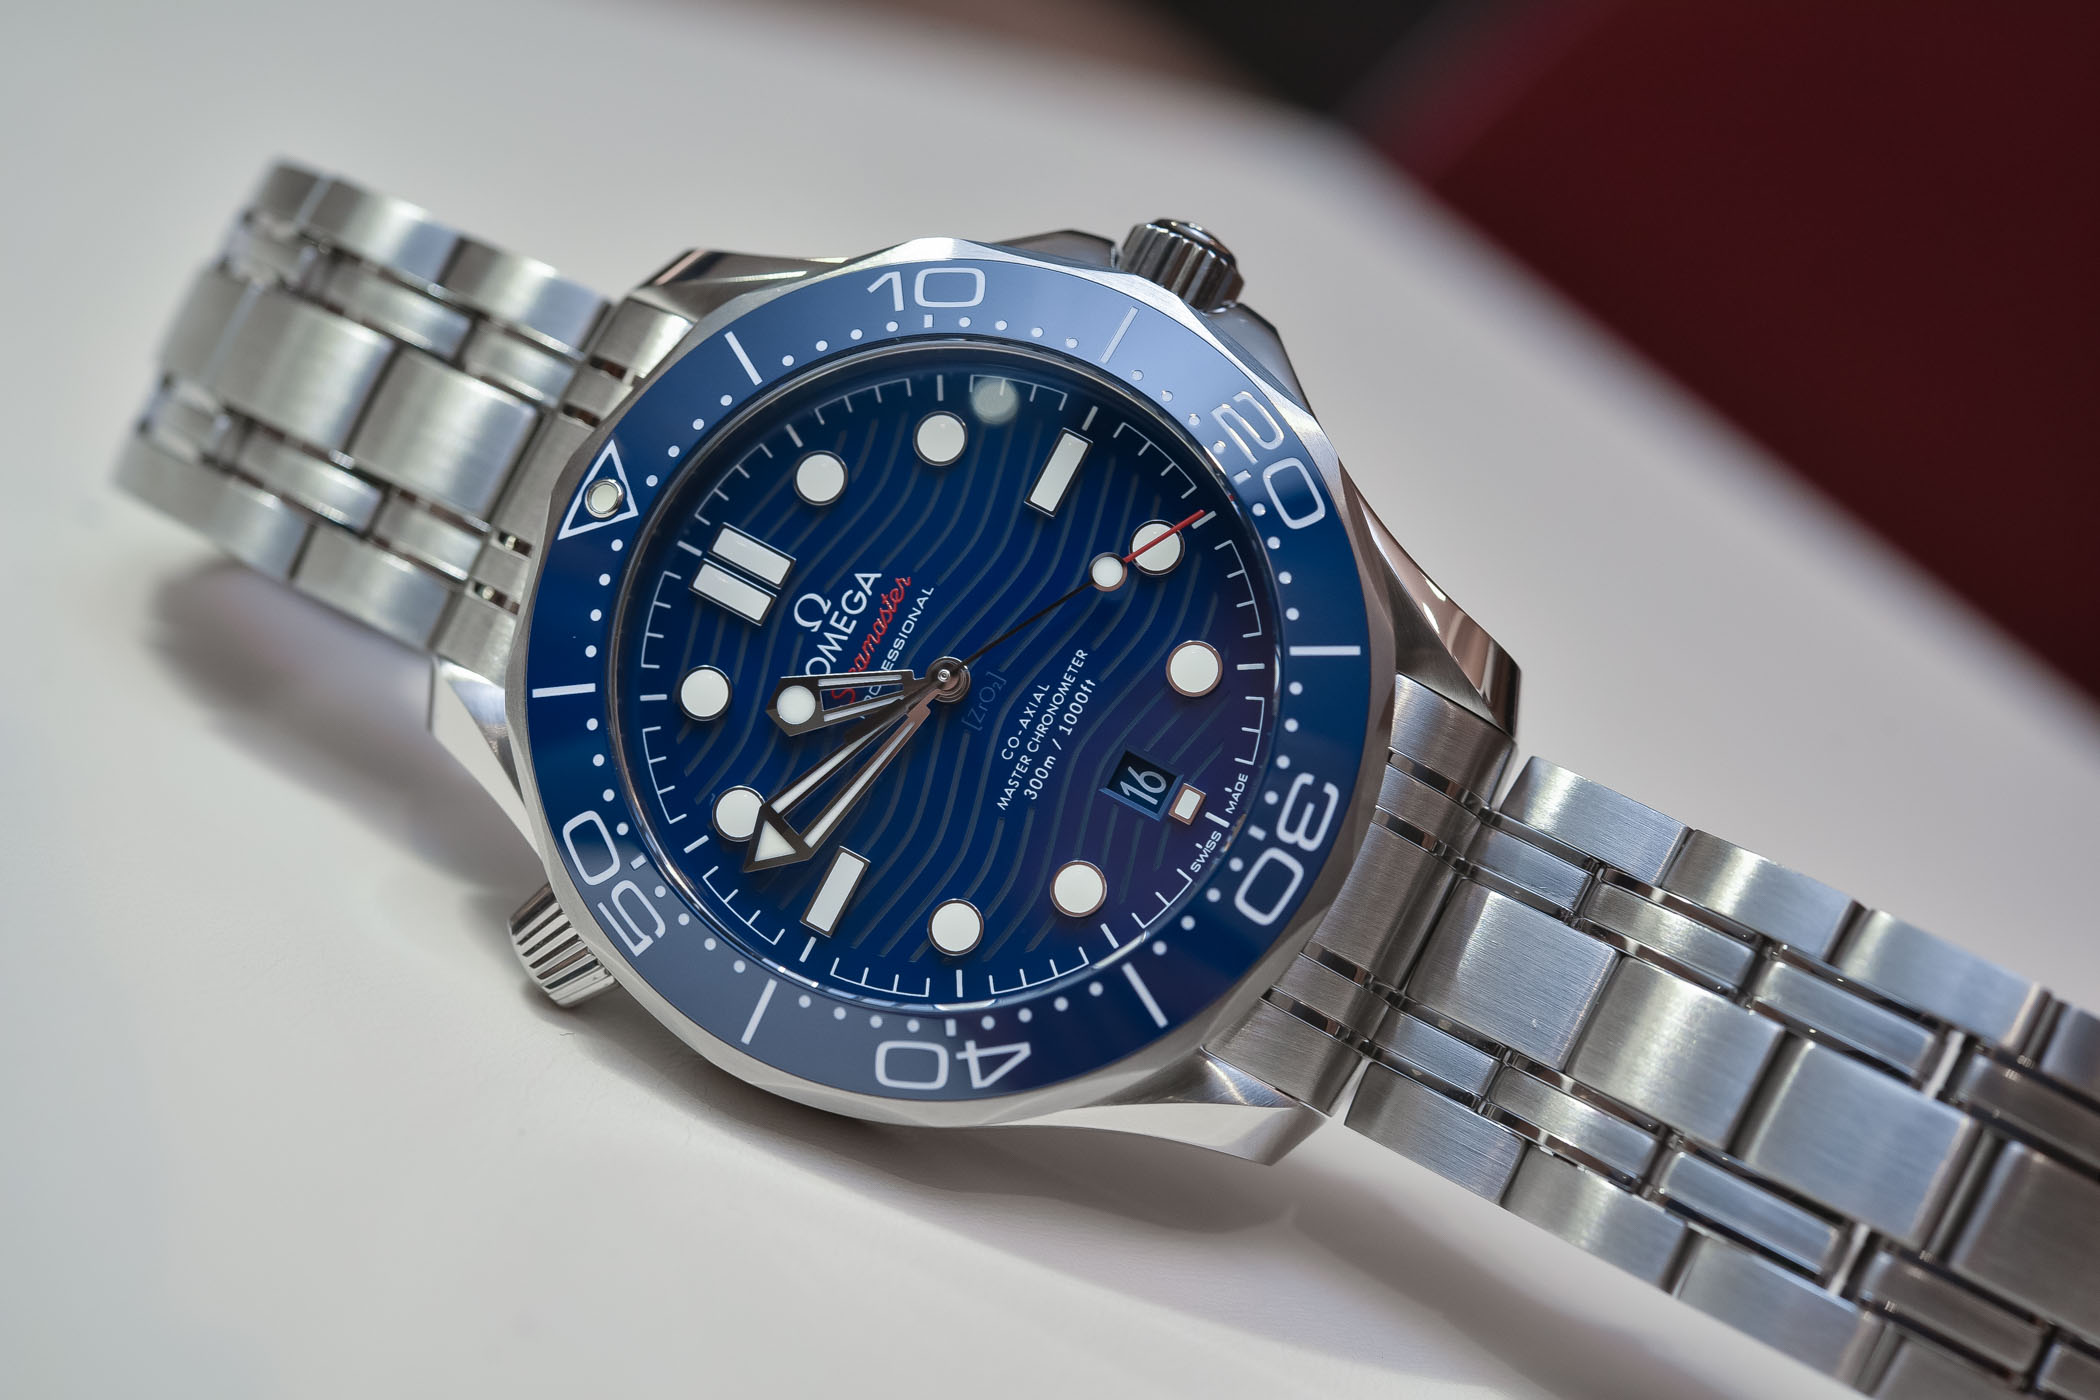 best omega watches 2018